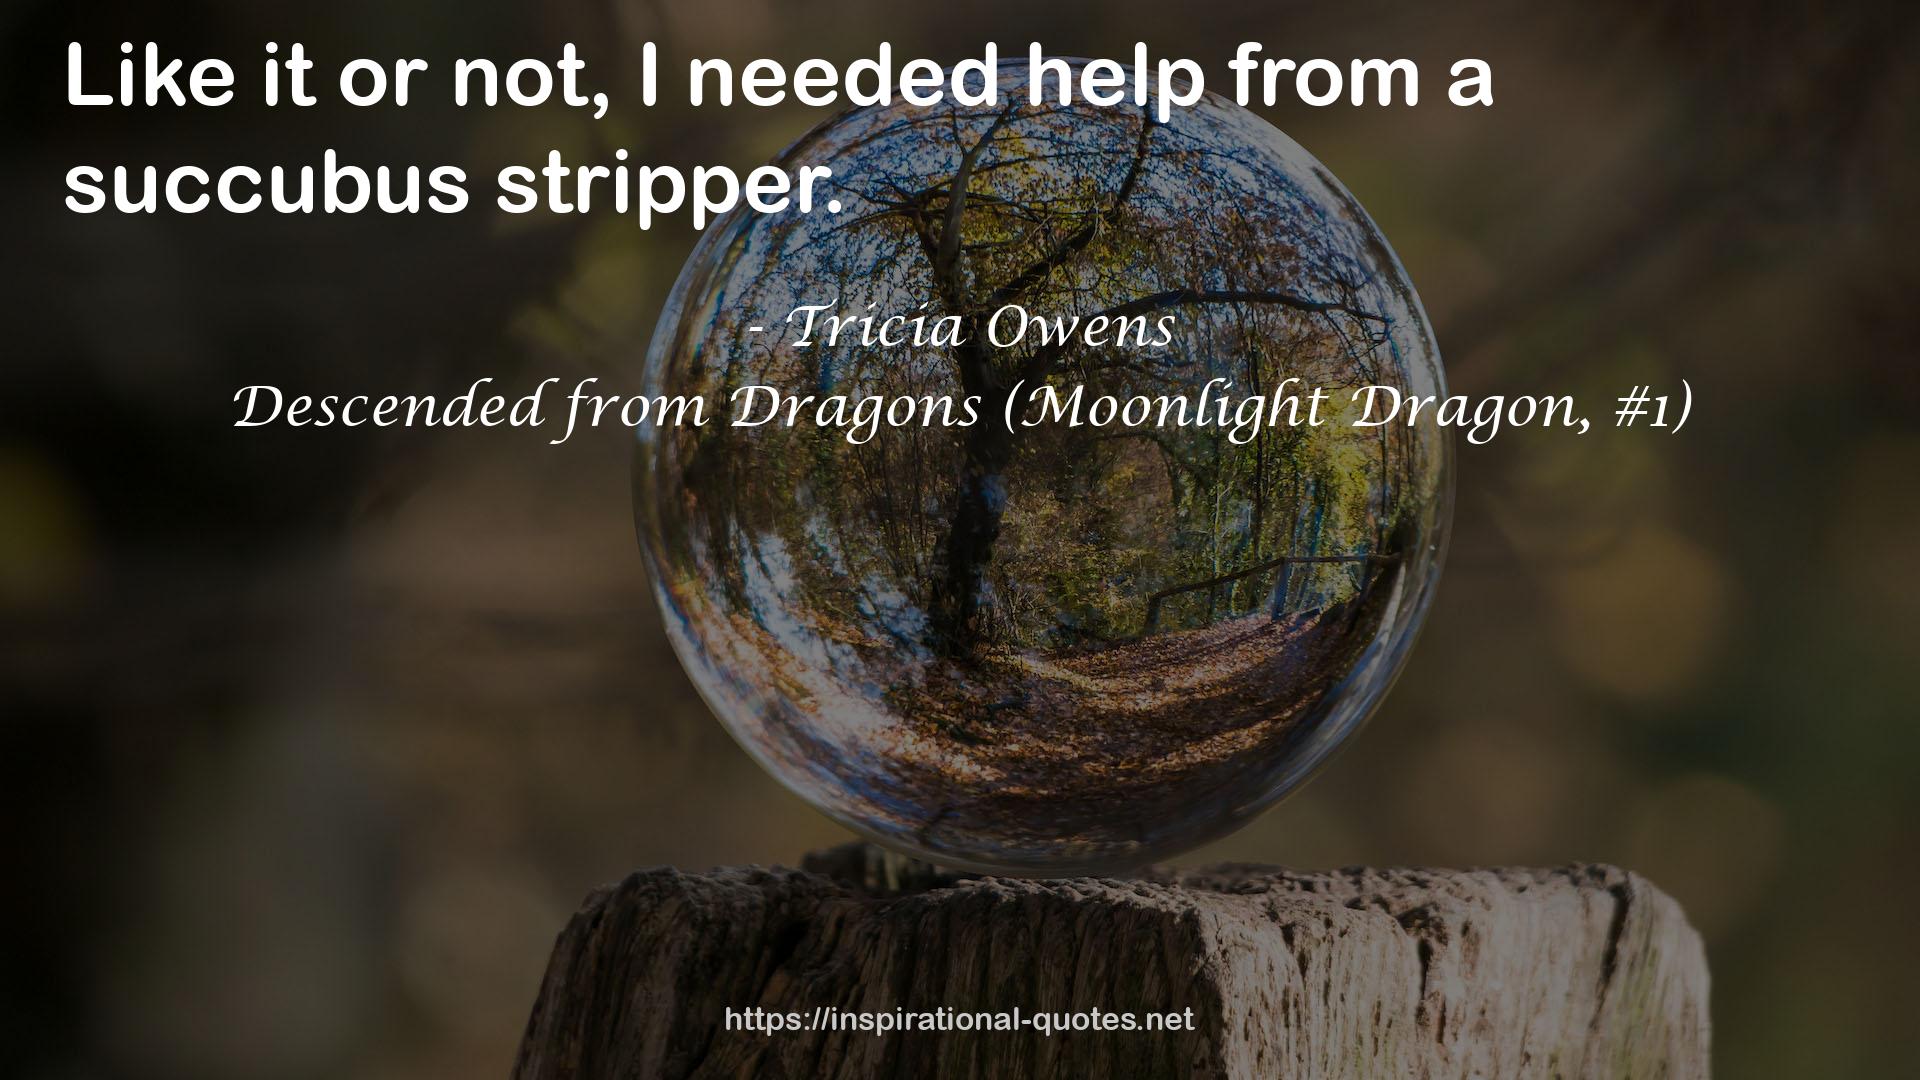 Descended from Dragons (Moonlight Dragon, #1) QUOTES